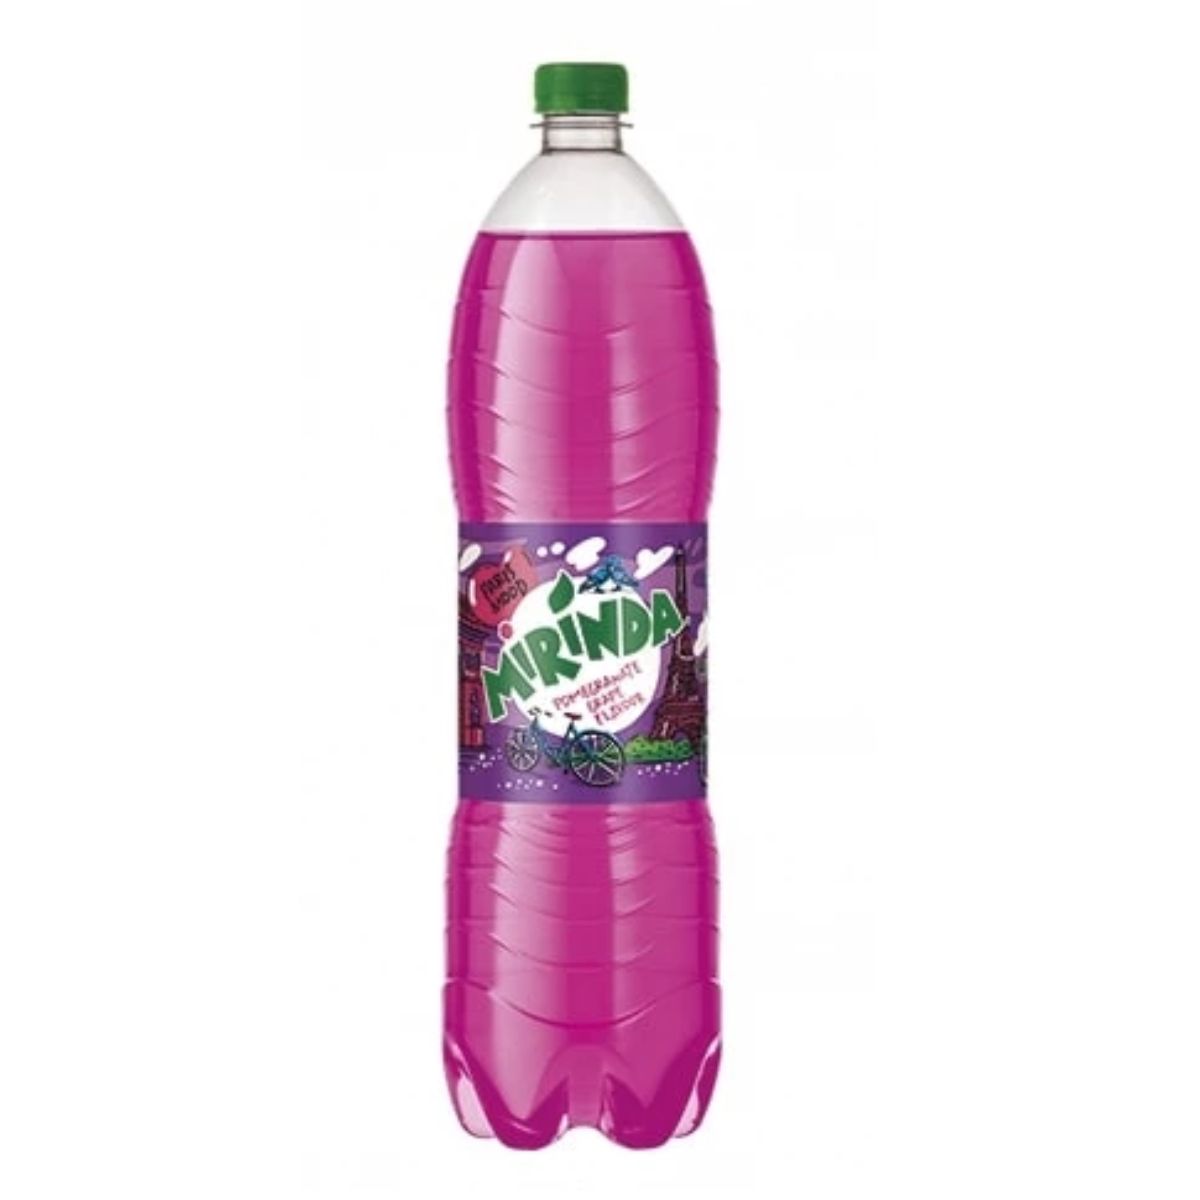 A plastic bottle of Mirinda - Pomegra & Grape Juice - 500ml with a purple liquid, featuring a colorful label with pomegranate and grape illustrations, and a bicycle.